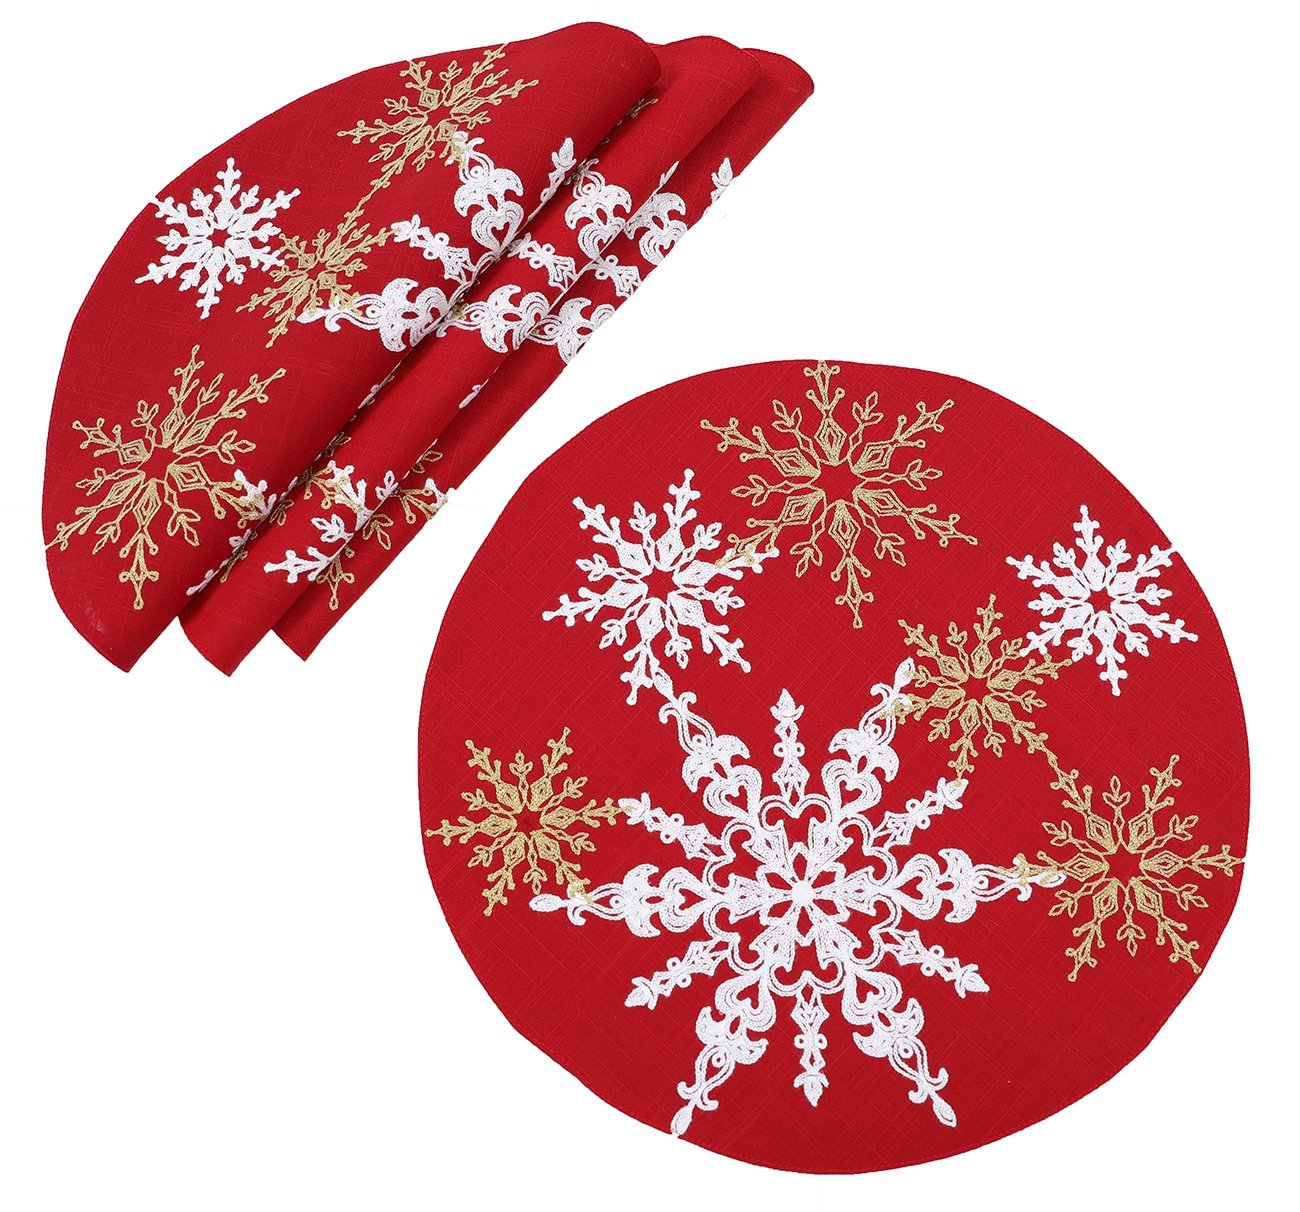 XD19802-Magical Snowflakes Crewel Embroidered Christmas Placemats